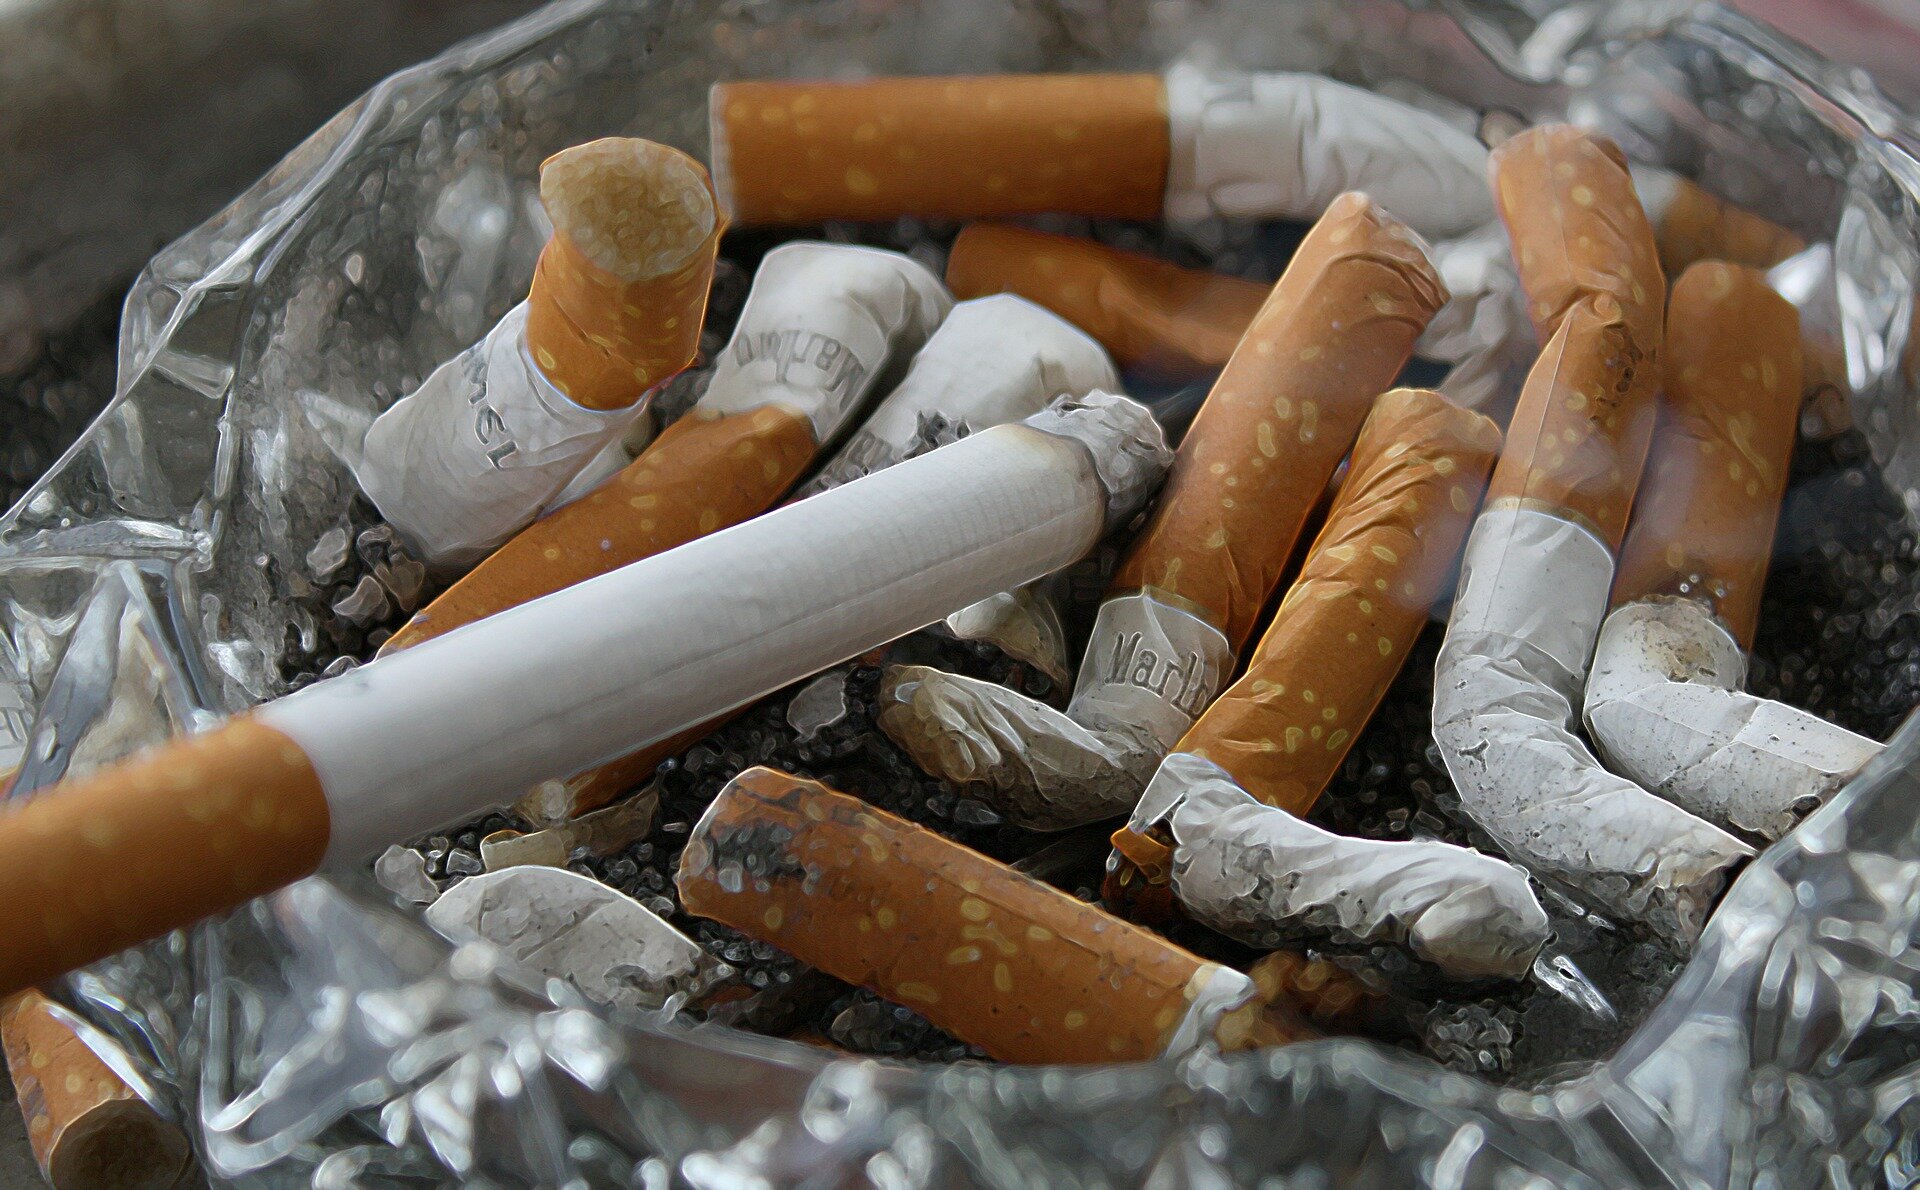 Smoking has negative effects for patients with psoriasis